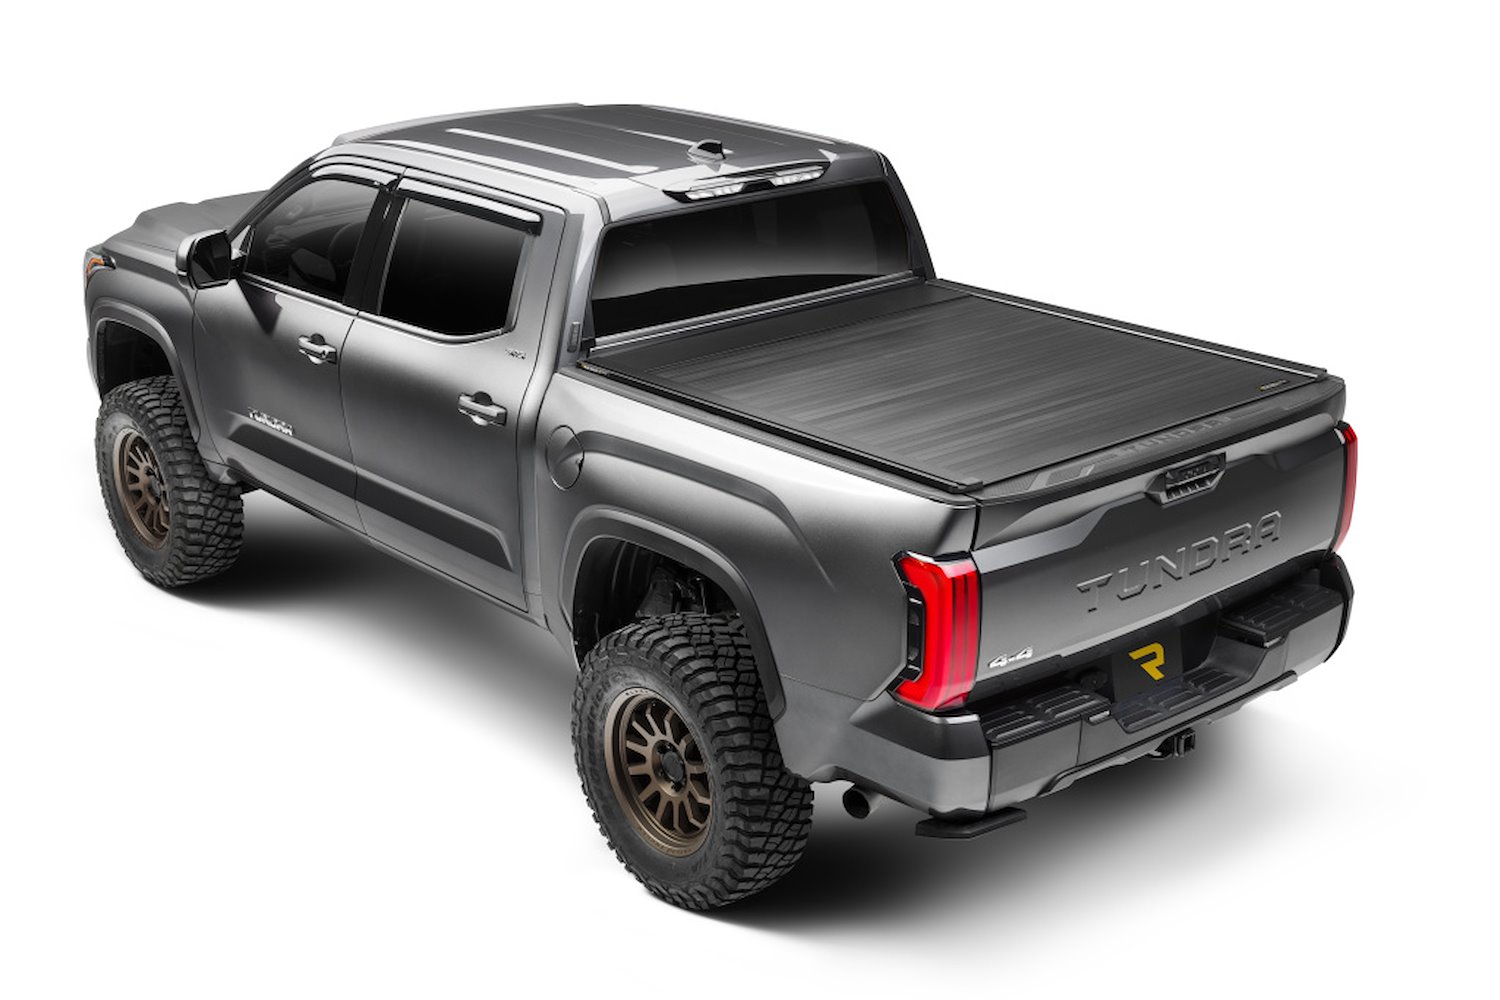 EQ0861 EQ Retractable Tonneau Cover 2022-2023 Toyota Tundra CrewMax 5' 7" Bed with Deck Rail System